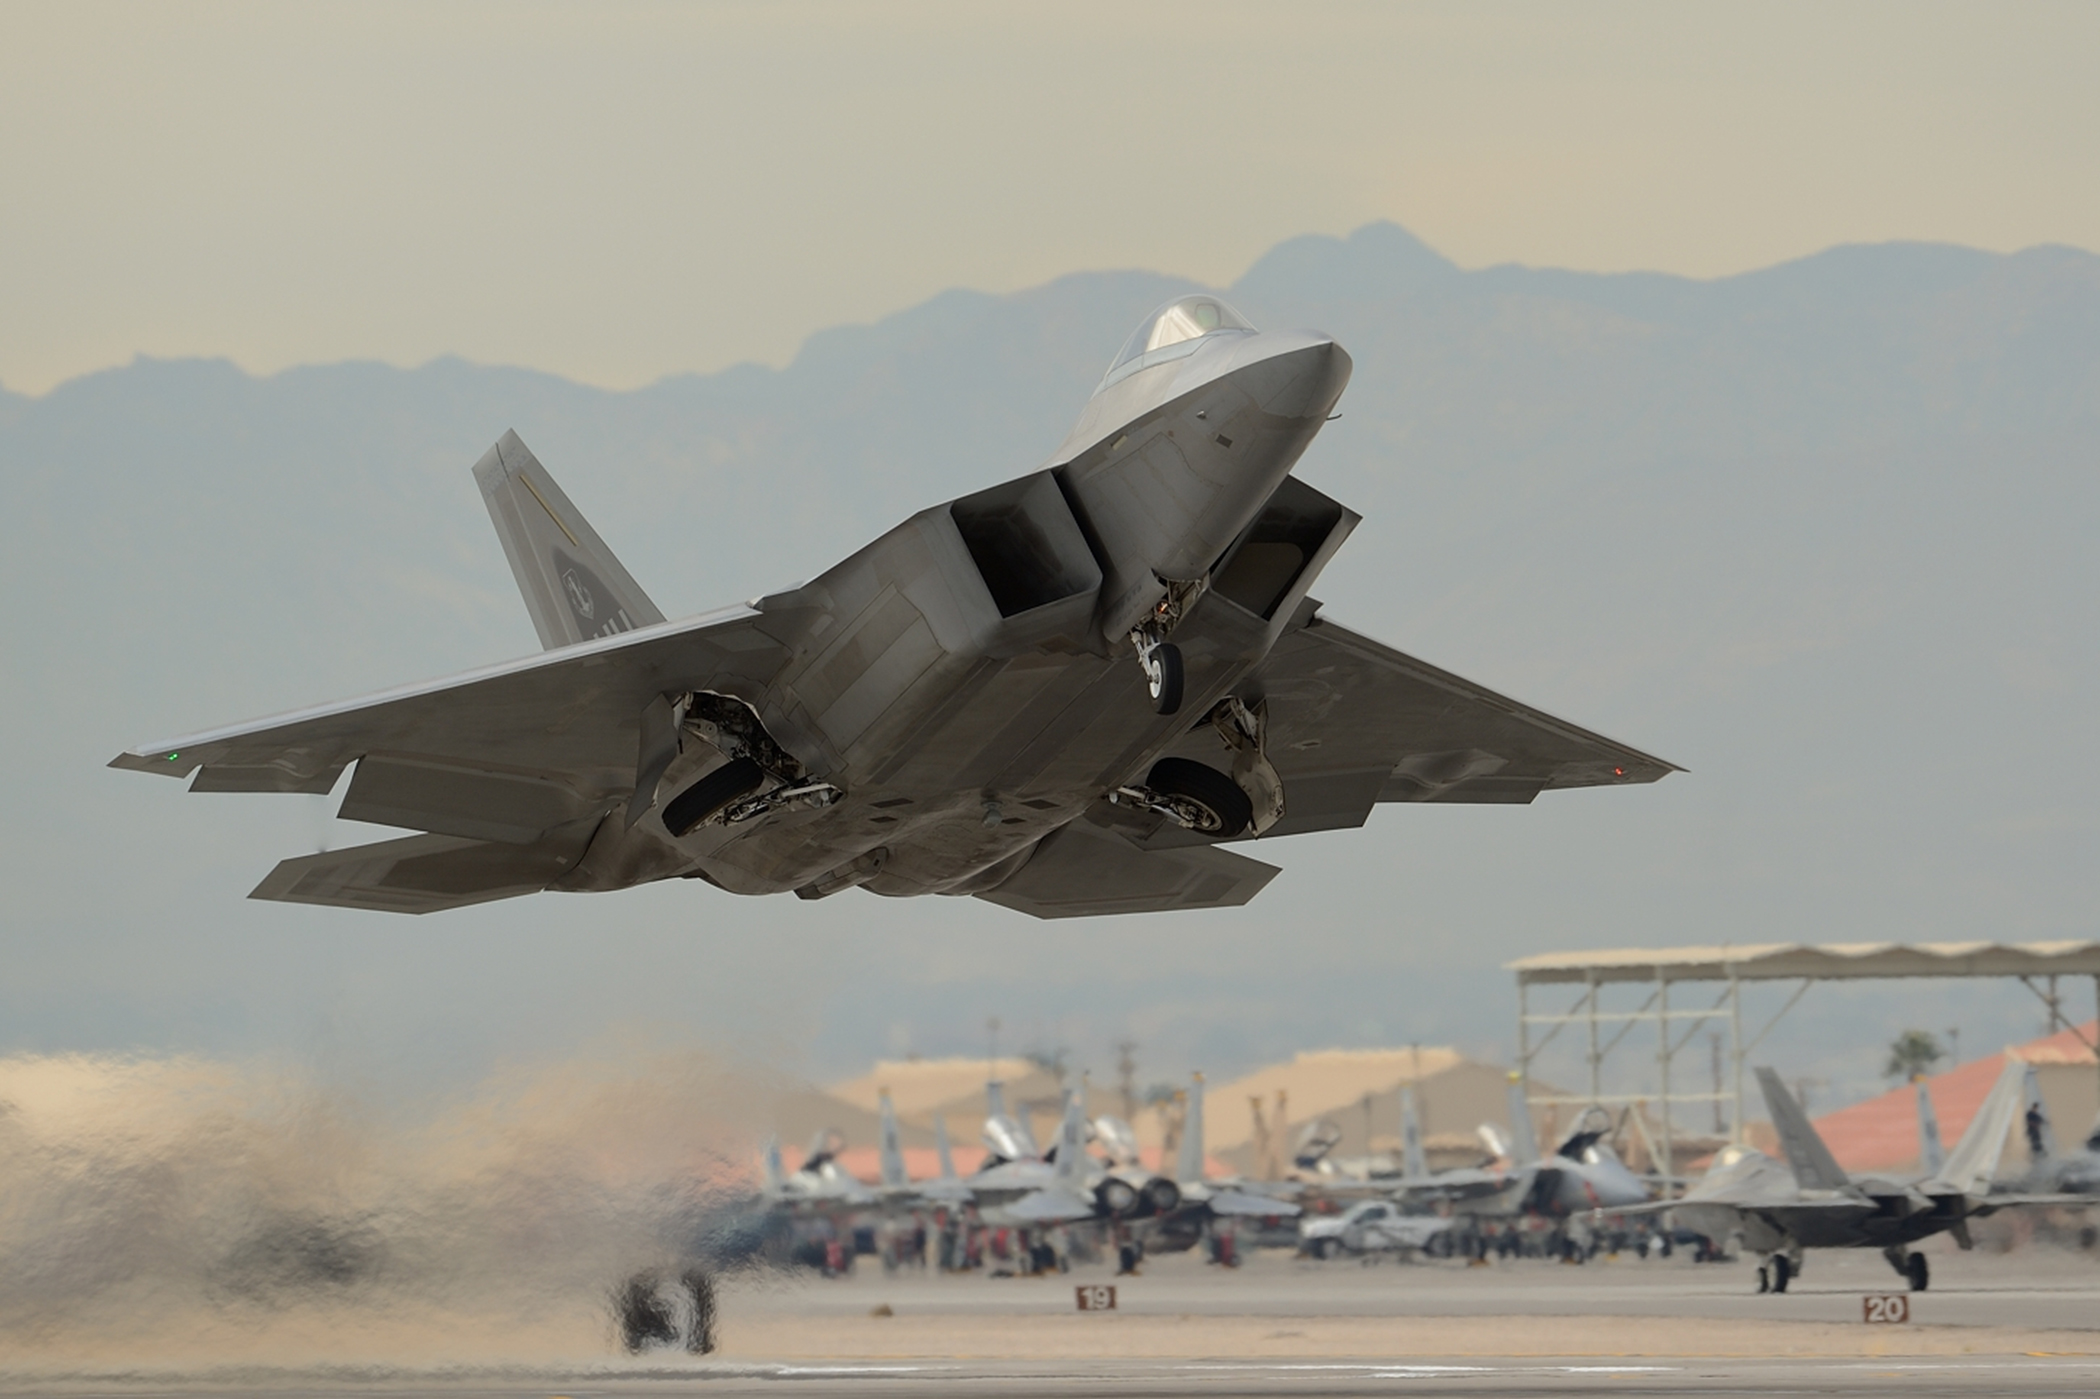 F-22 Raptor, the only 5th Generation Fighter in service with anyone as of 2016.